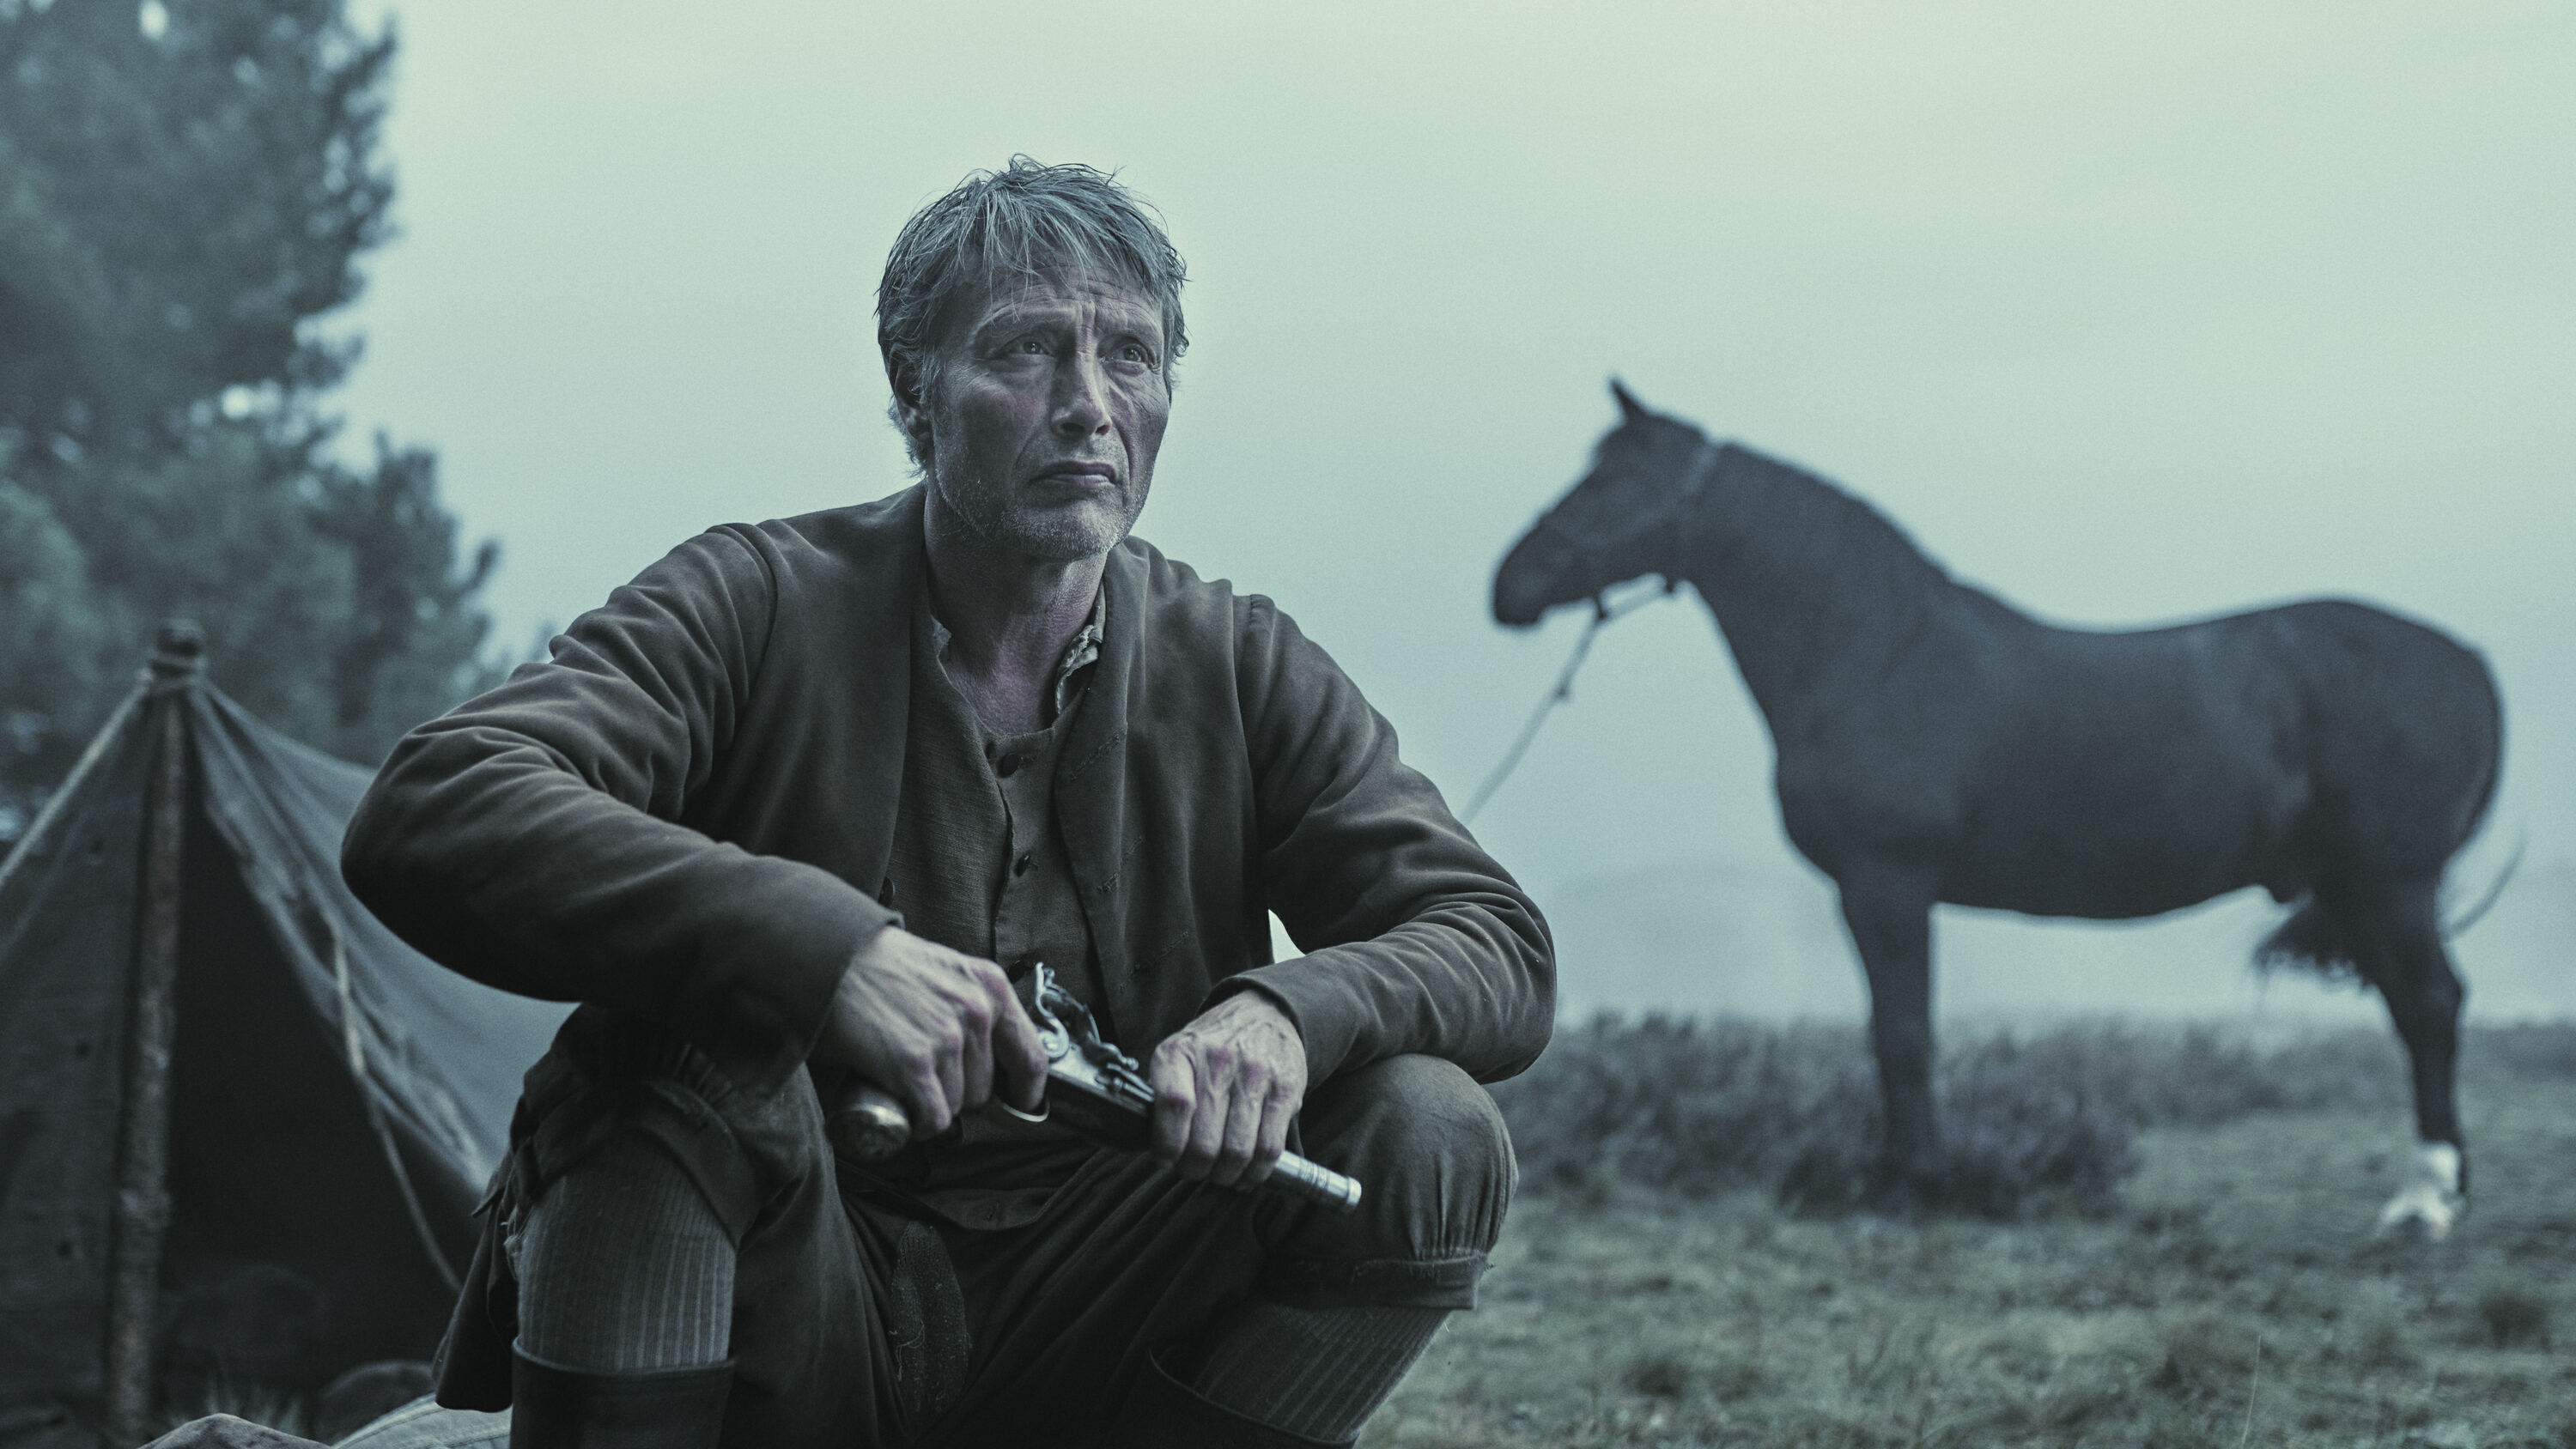 The Promised Land review: Mads Mikkelsen is a towering presence is this  Danish period epic